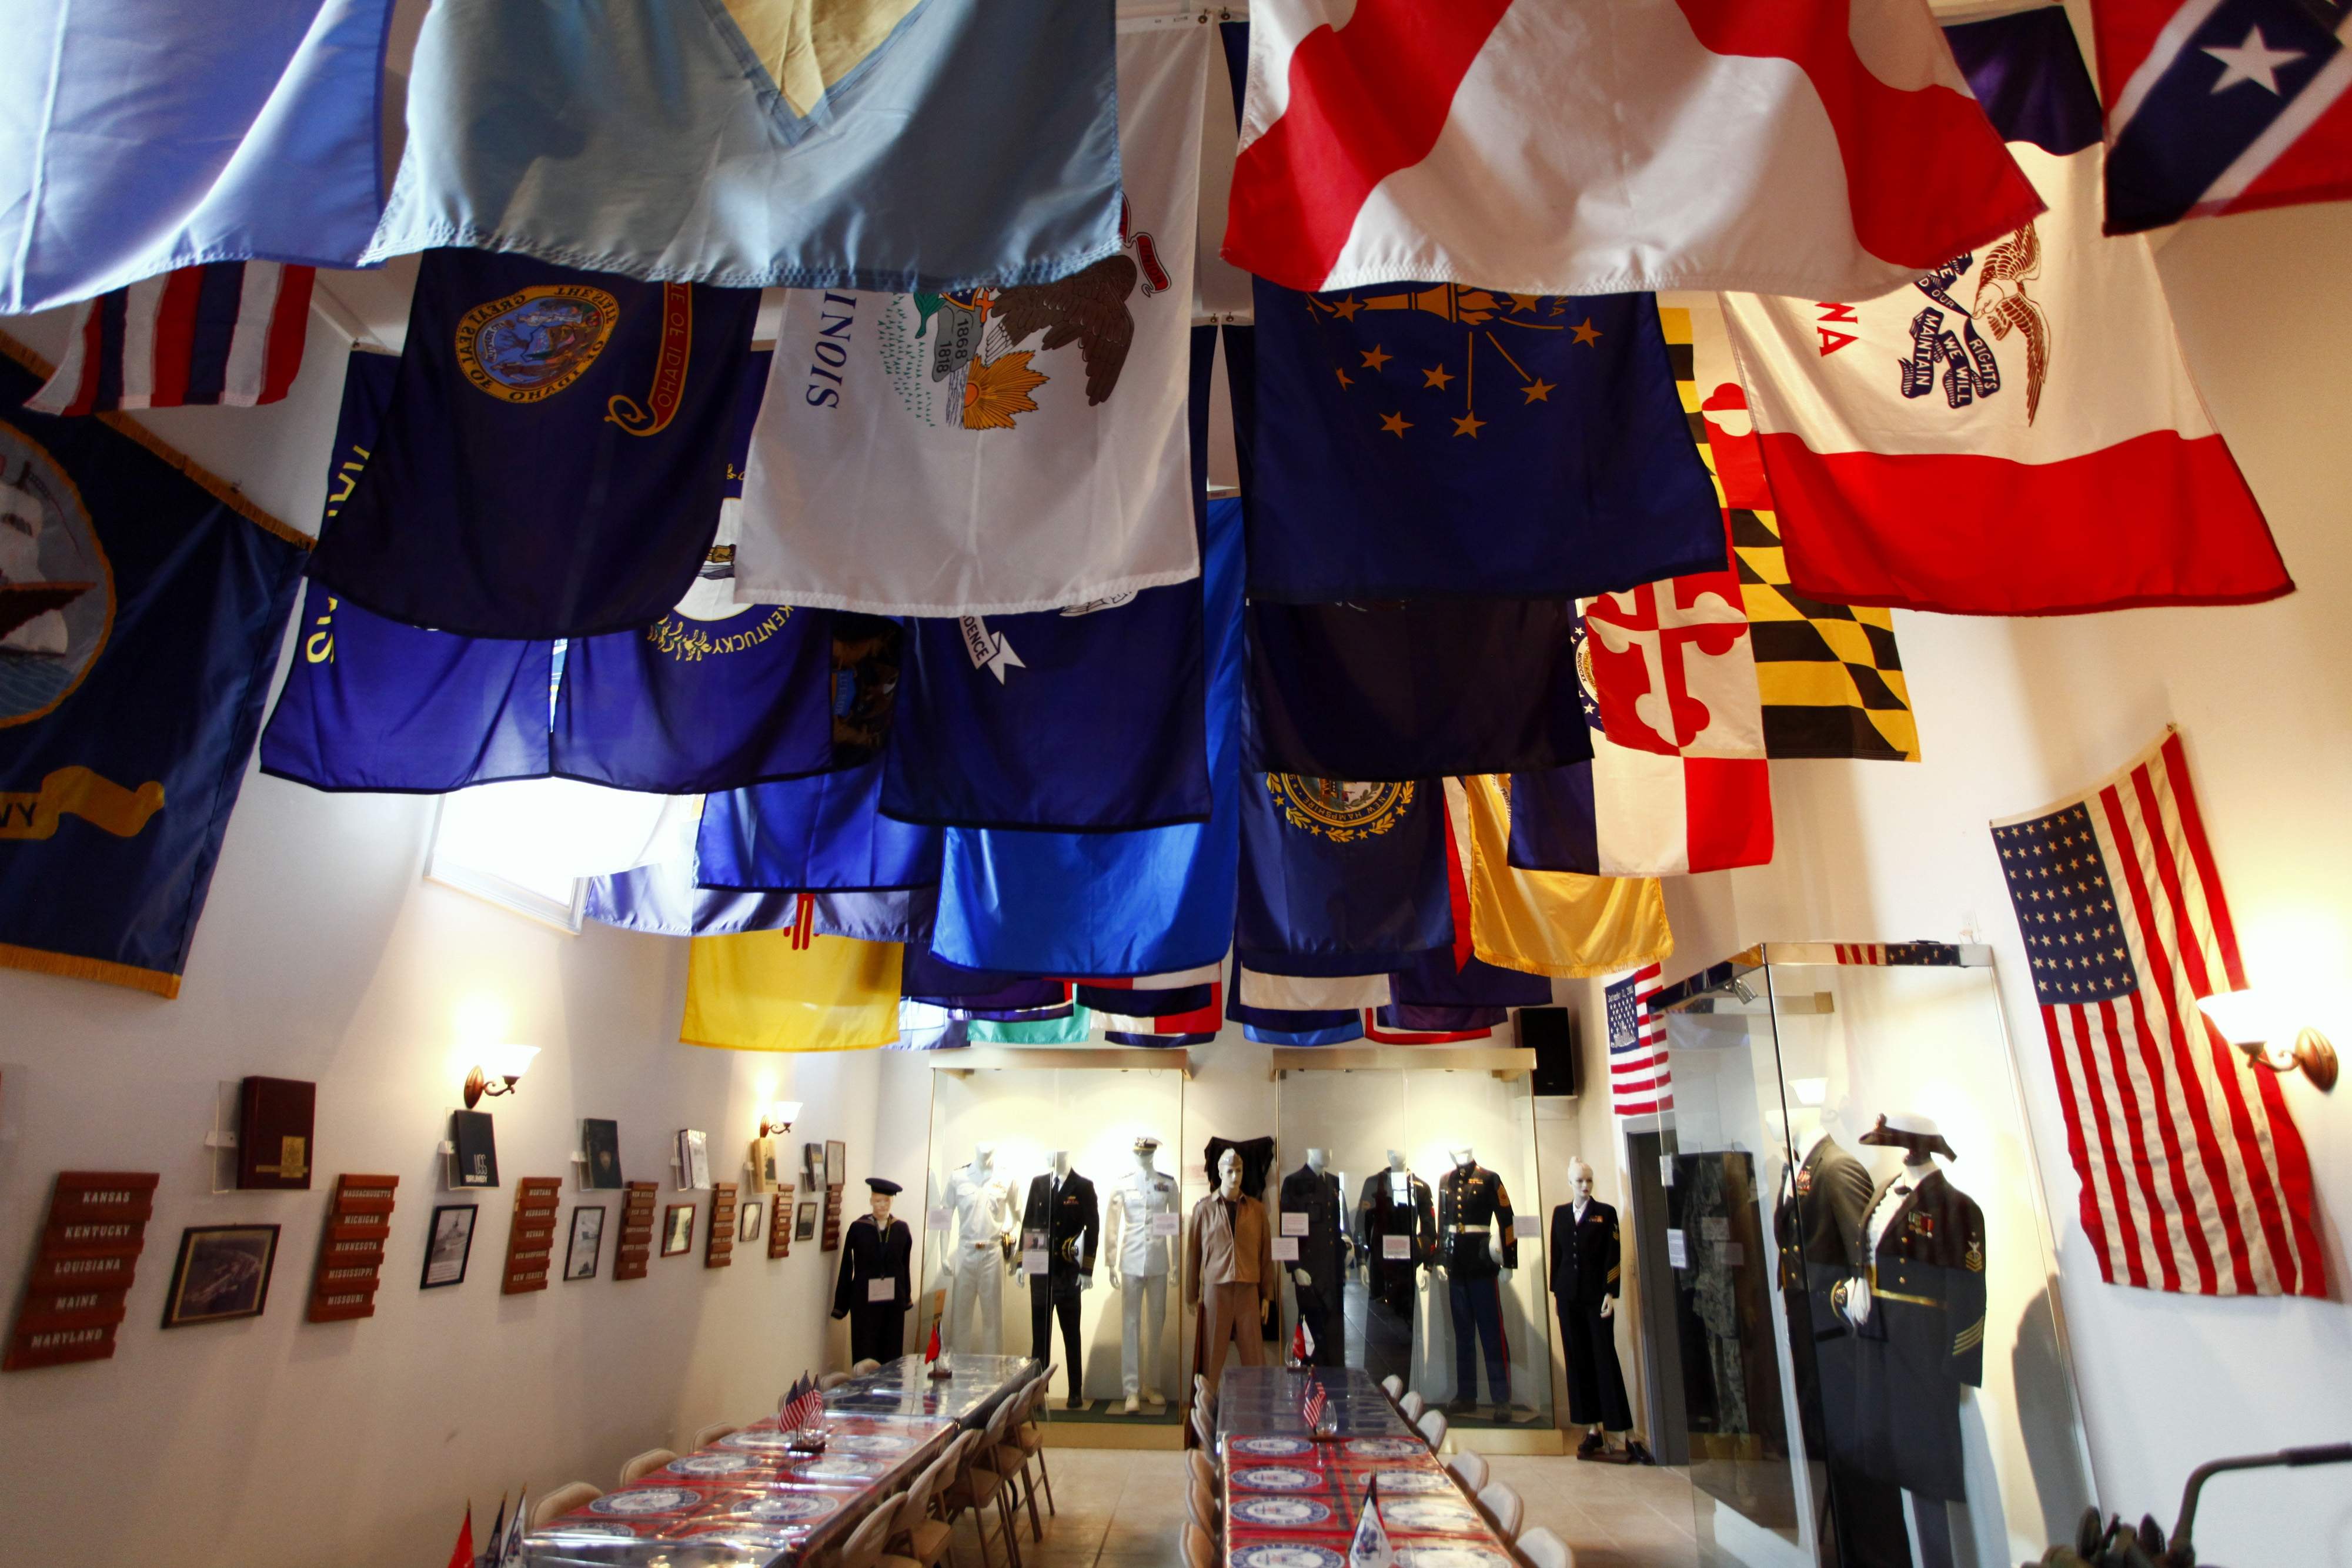 The banquet room, with state flags hanging from the ceiling